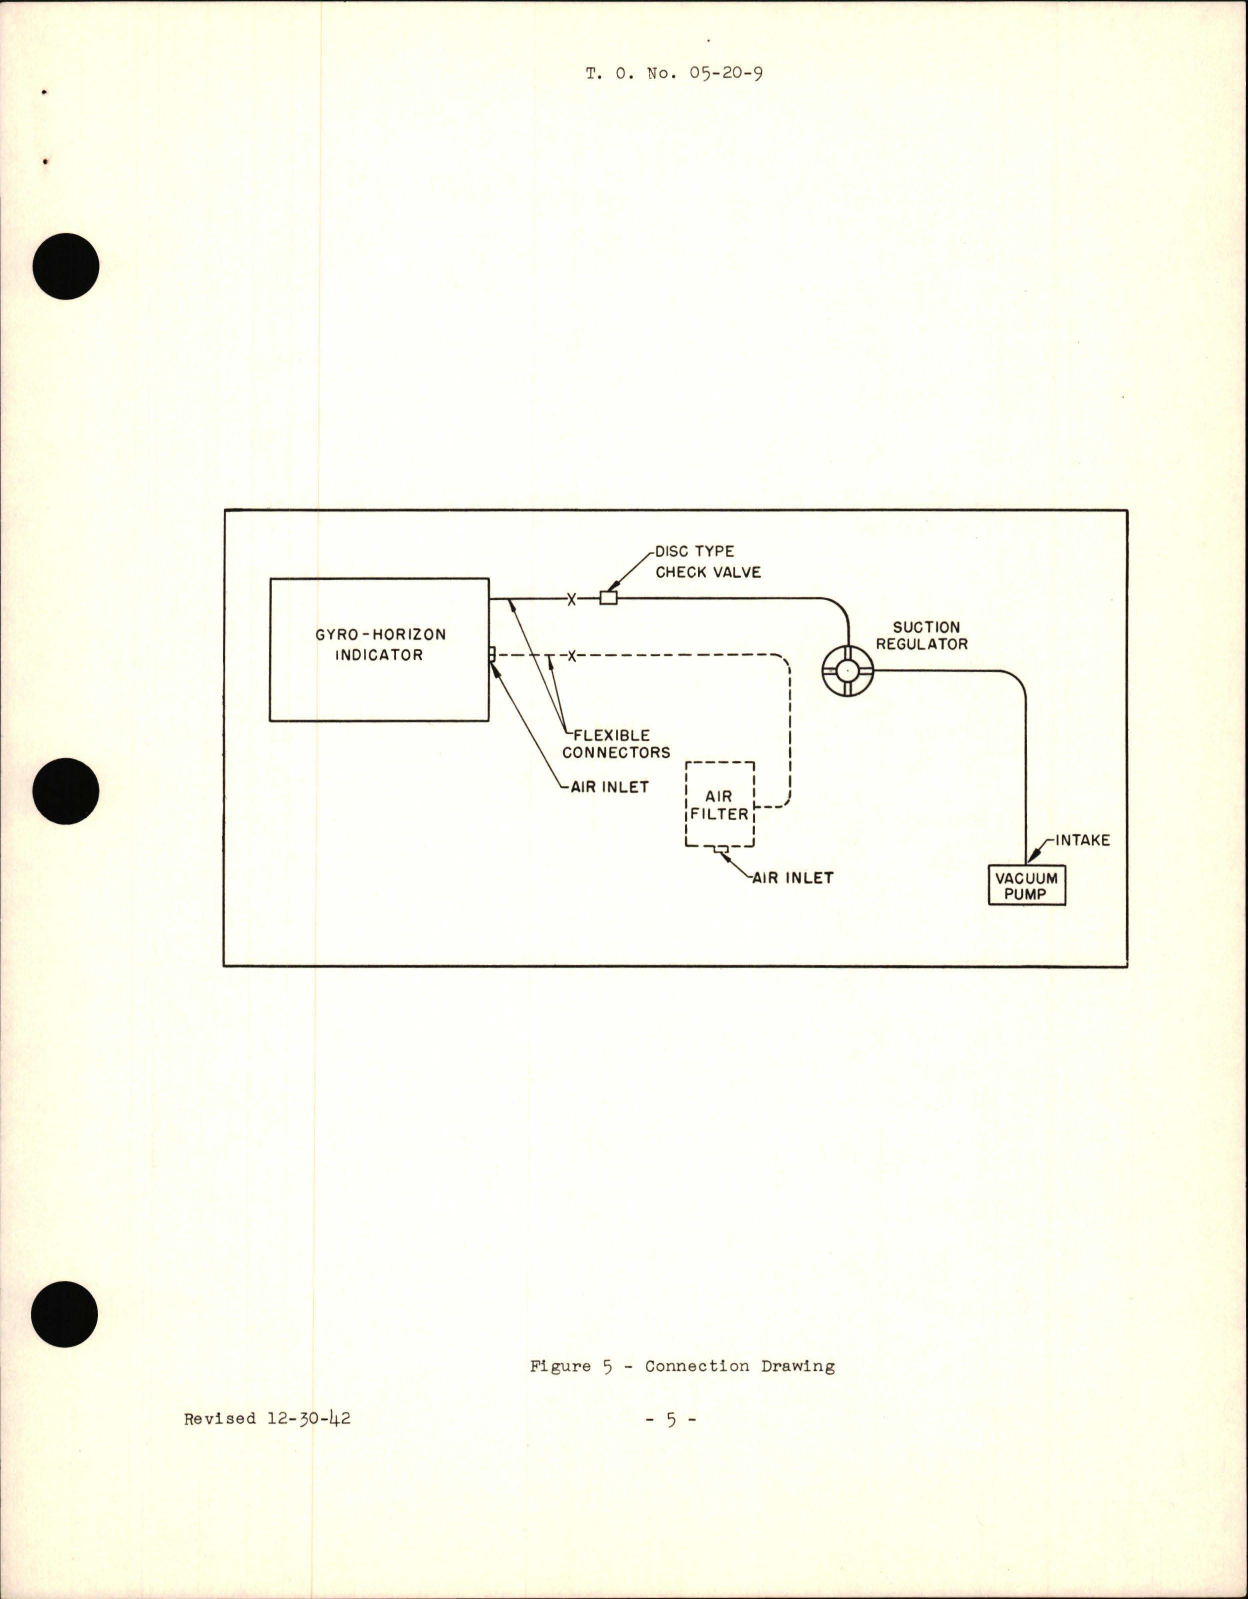 Sample page 9 from AirCorps Library document: Operation, Service and Overhaul Instructions with Parts for Gyro Horizon Indicator - Type AN5736